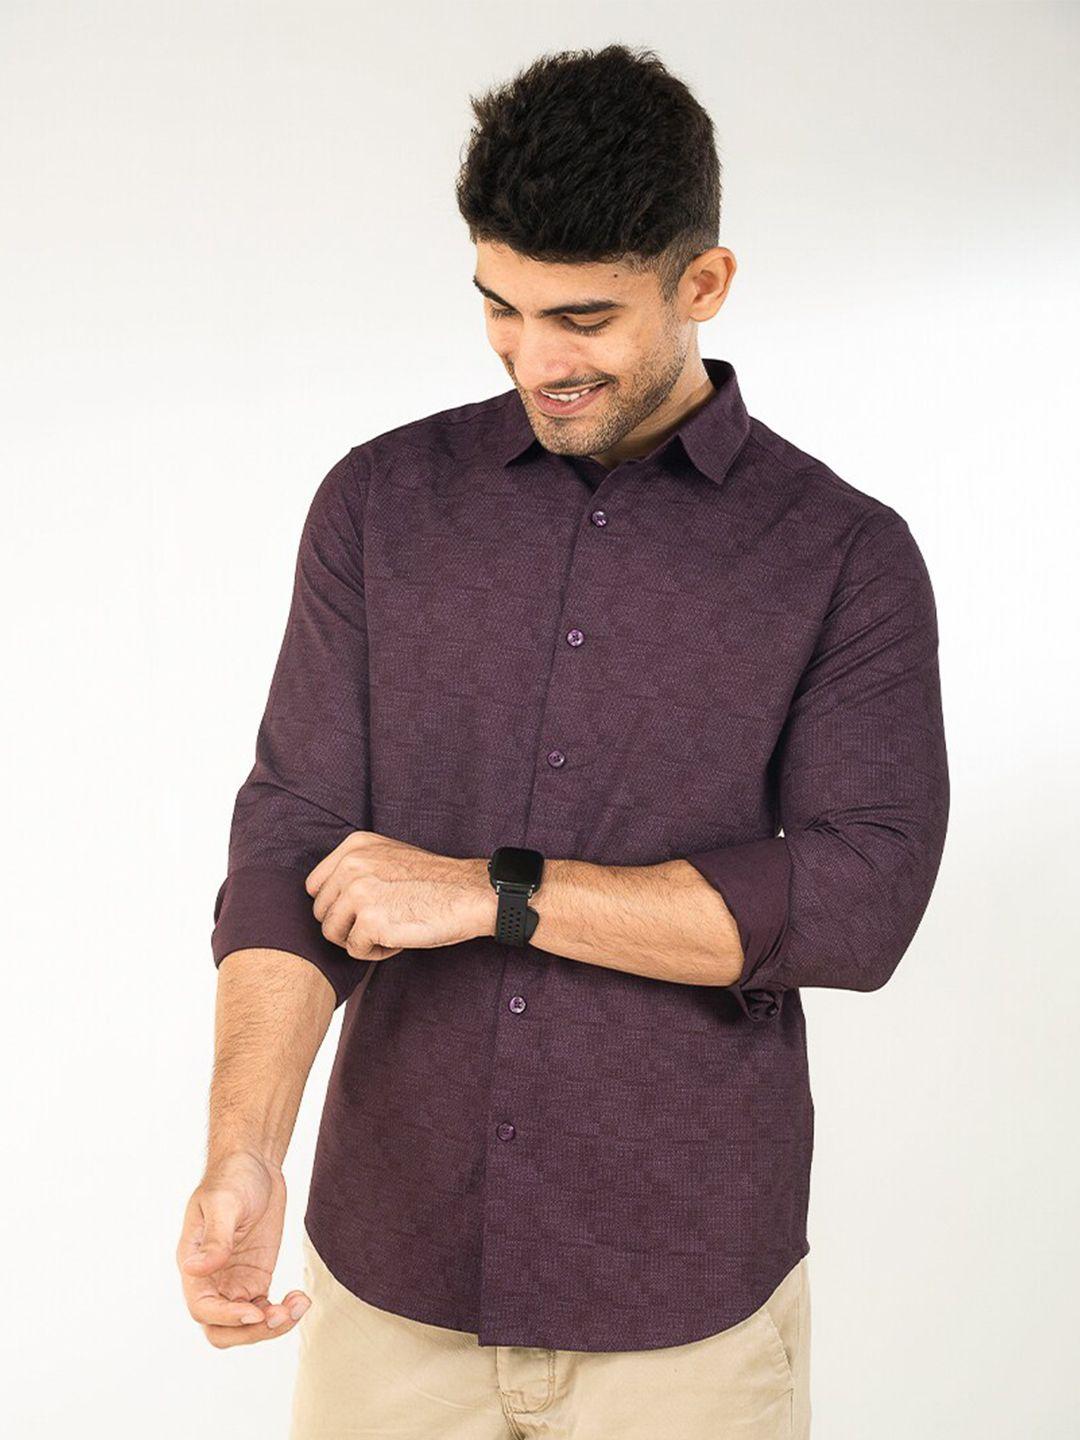 the bleu label classic slim fit micro ditsy printed casual shirt